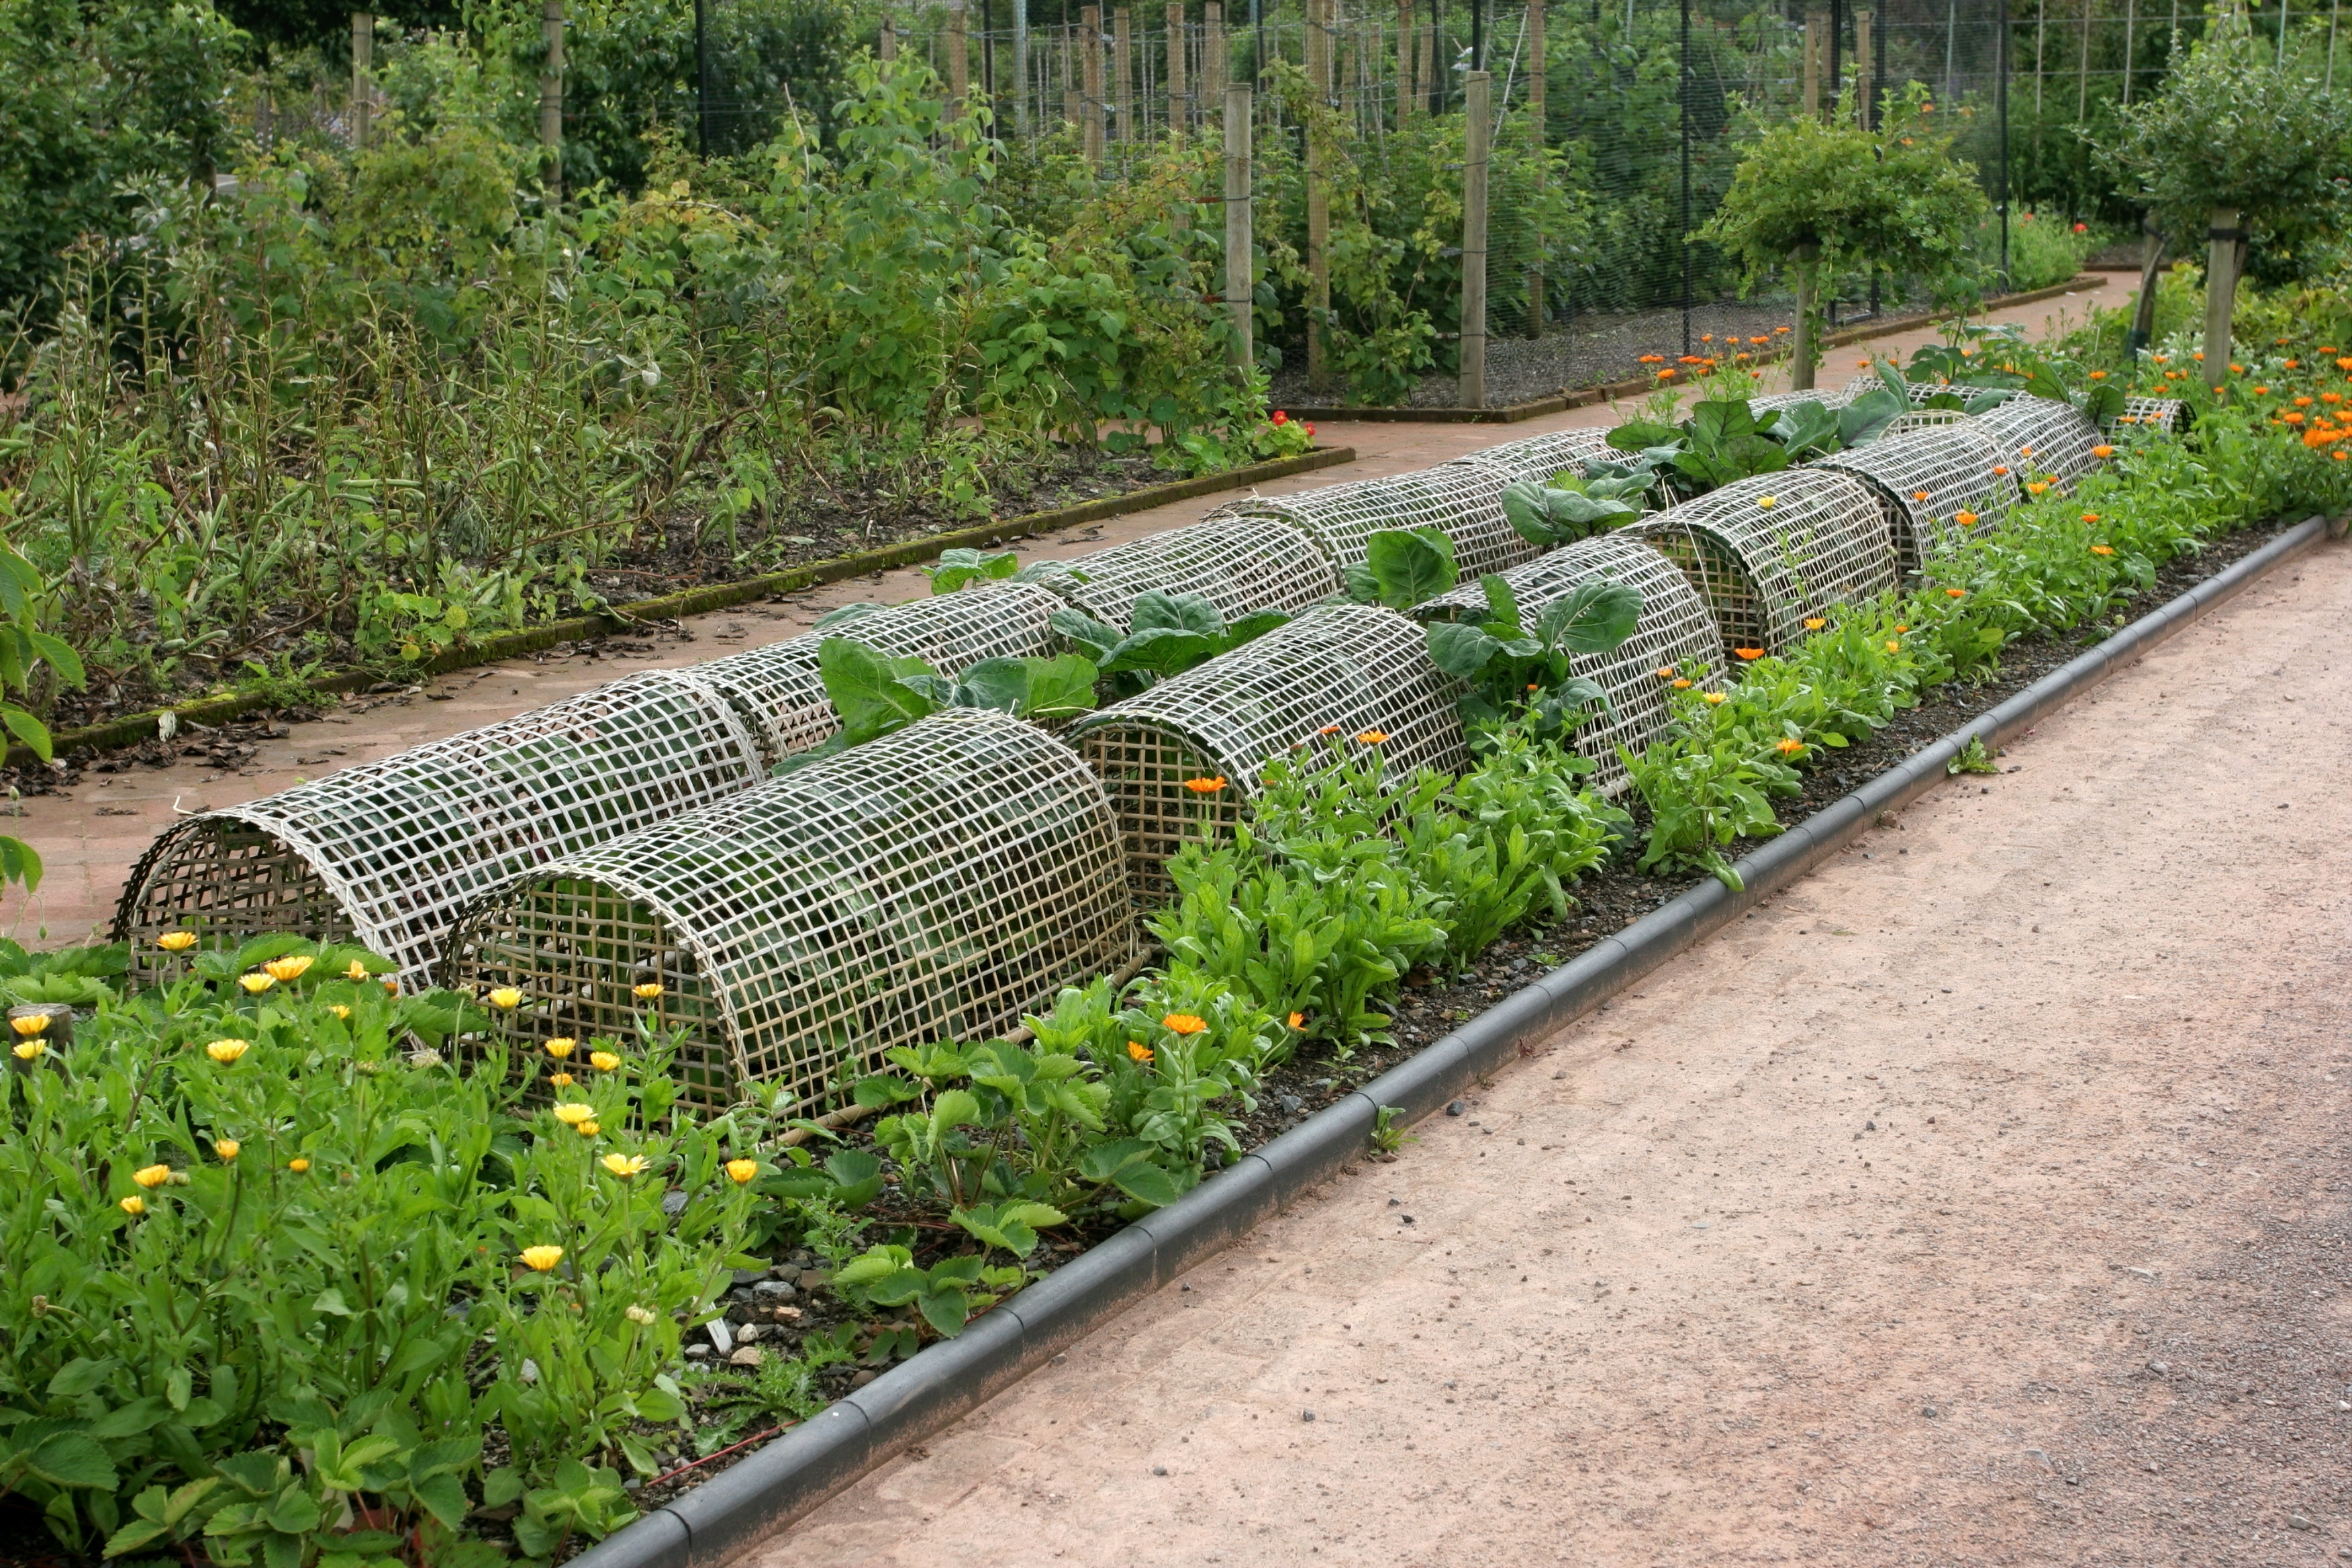 Woven wooden plant protectors covering cabbages in a vegetable bed in a garden, with marigolds to the sides acting as companion plants to deter pests. Fruit bushes to the rear.